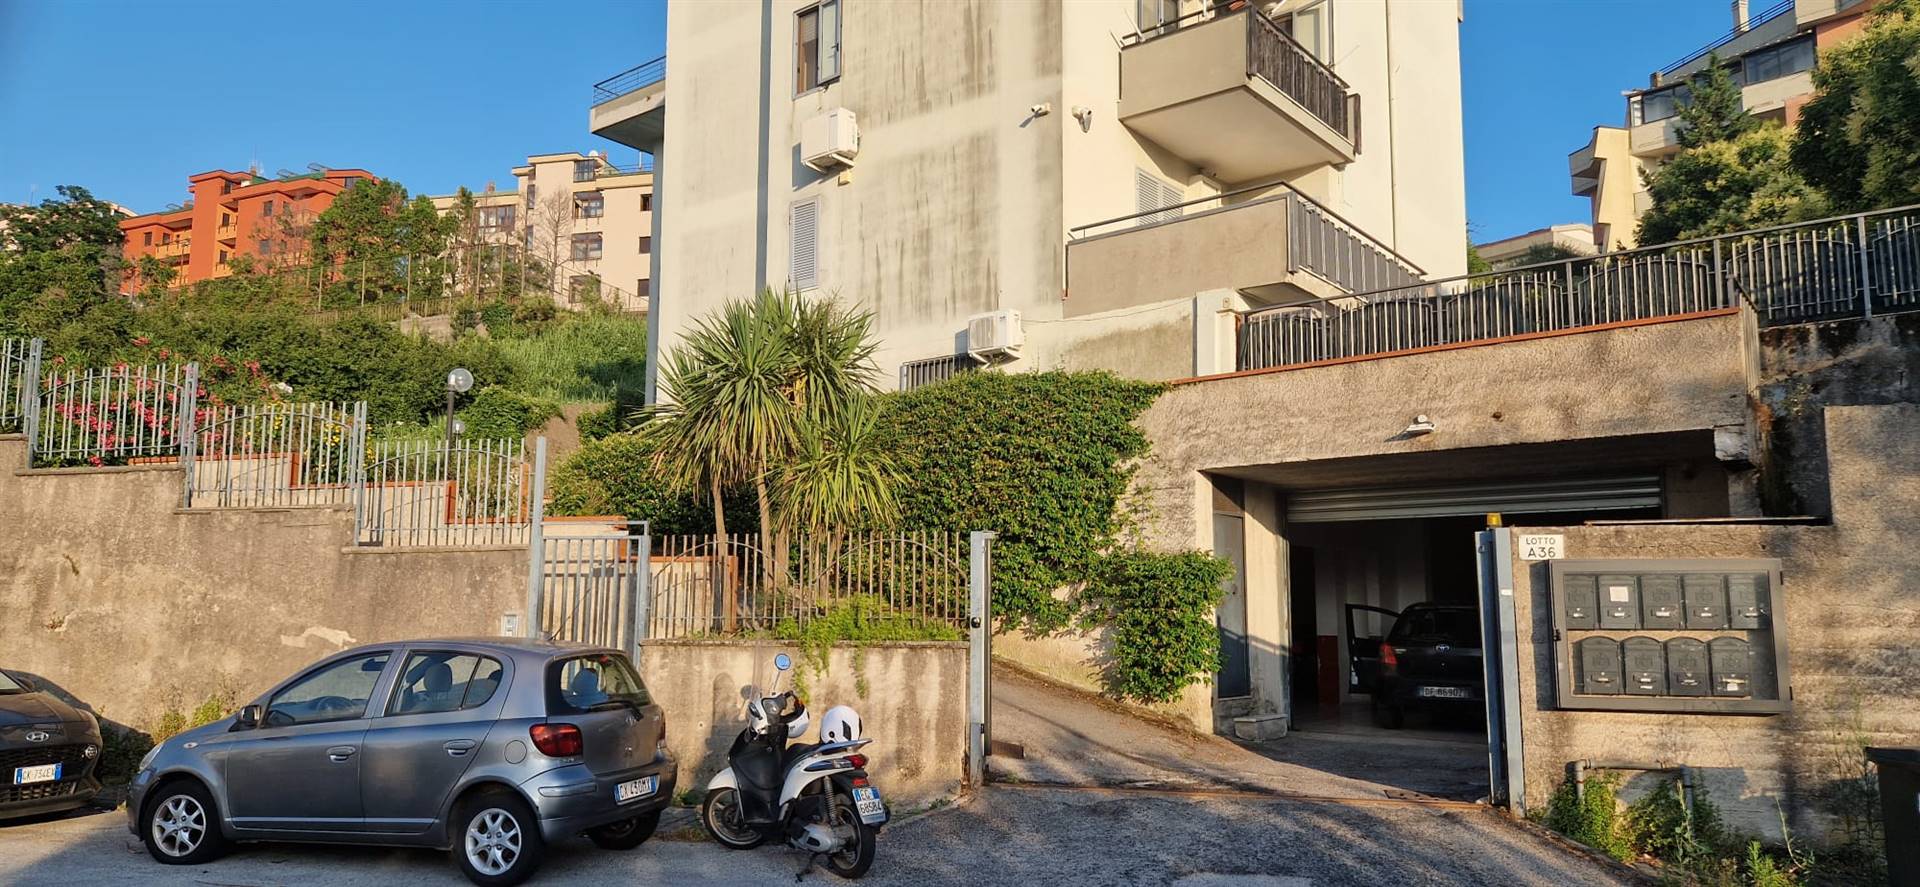 GINESTRE / SALA ABBAGNANO / PANORAMICA / CASA MANZO, SALERNO, Apartment for sale of 40 Sq. mt., Good condition, Heating Individual heating system, 